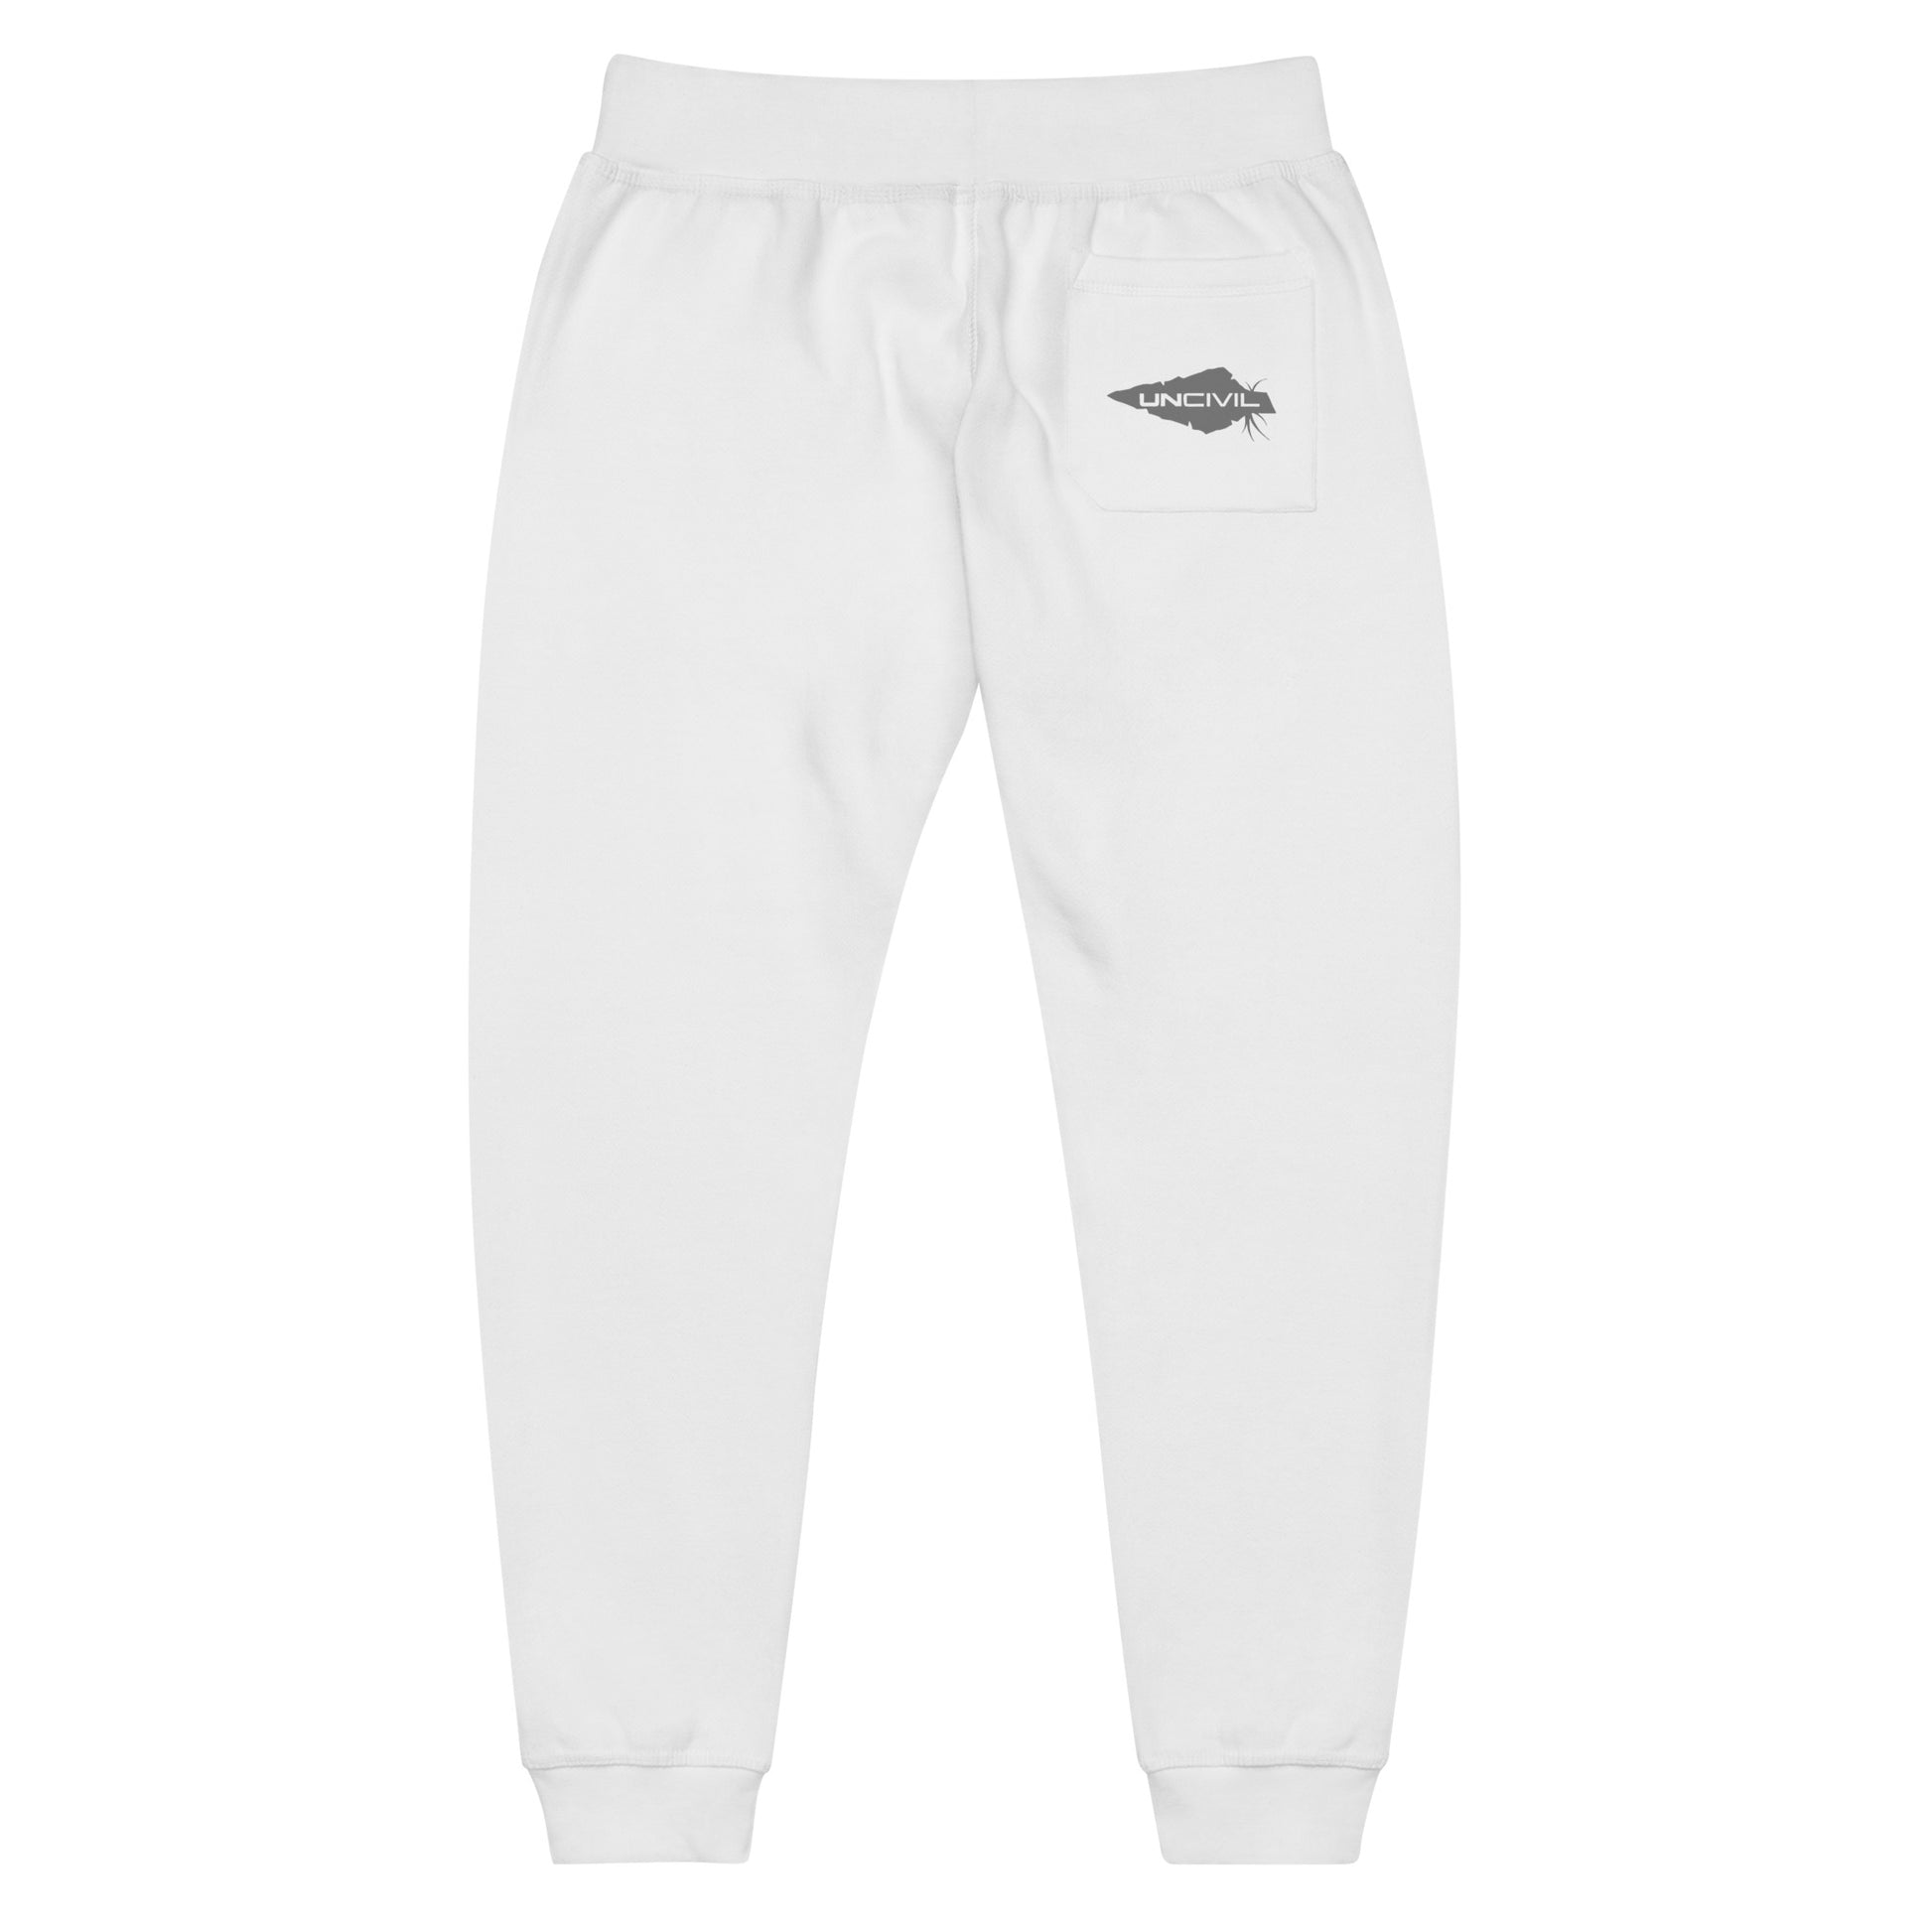 White sweatpants, UNCIVIL on front left leg and UNCIVIL patch on the back right pocket.